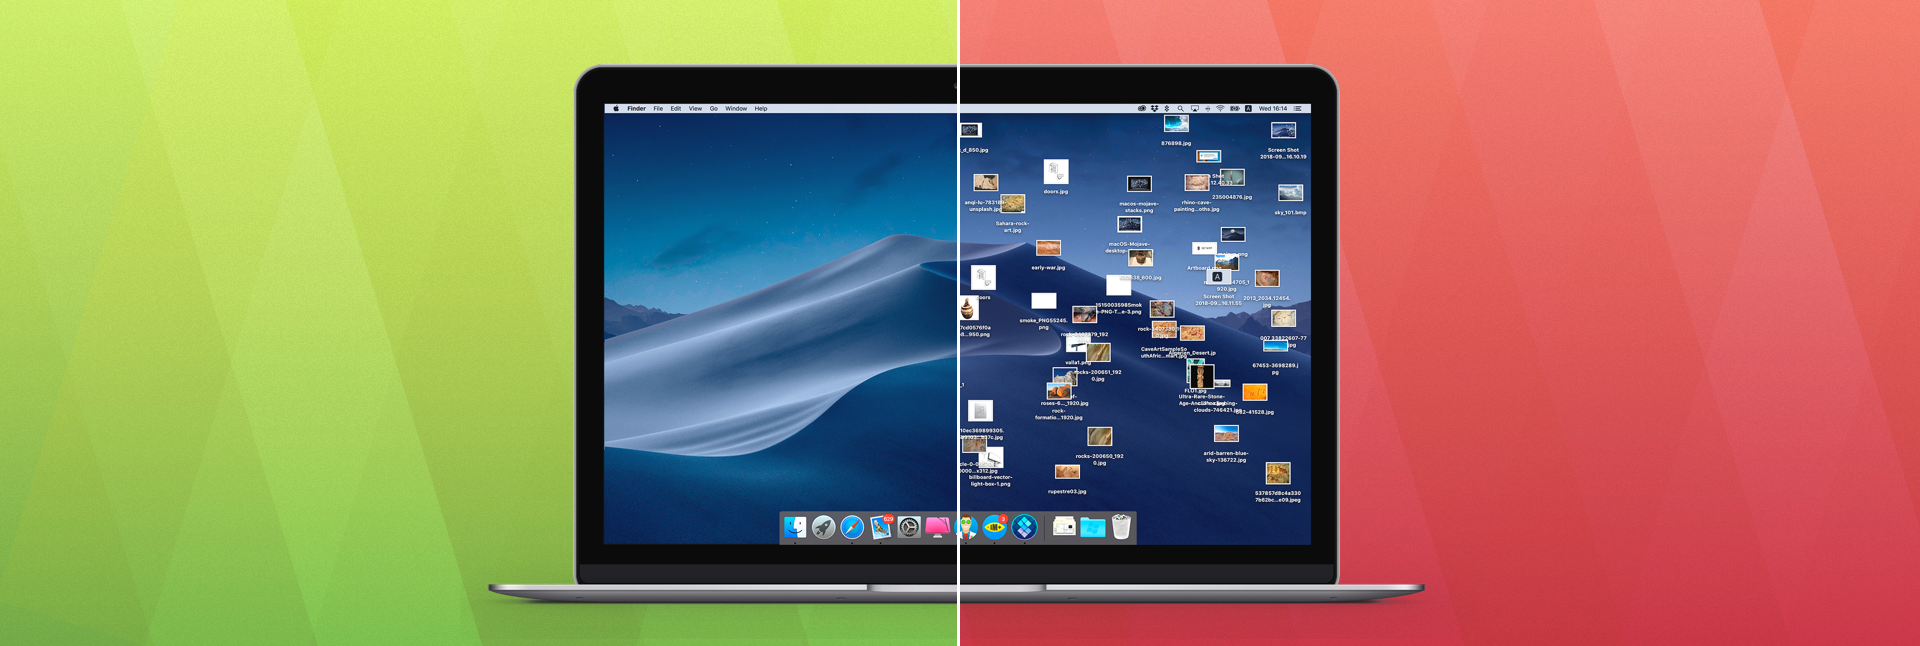 Fast and easy tips to tidy up your Mac desktop